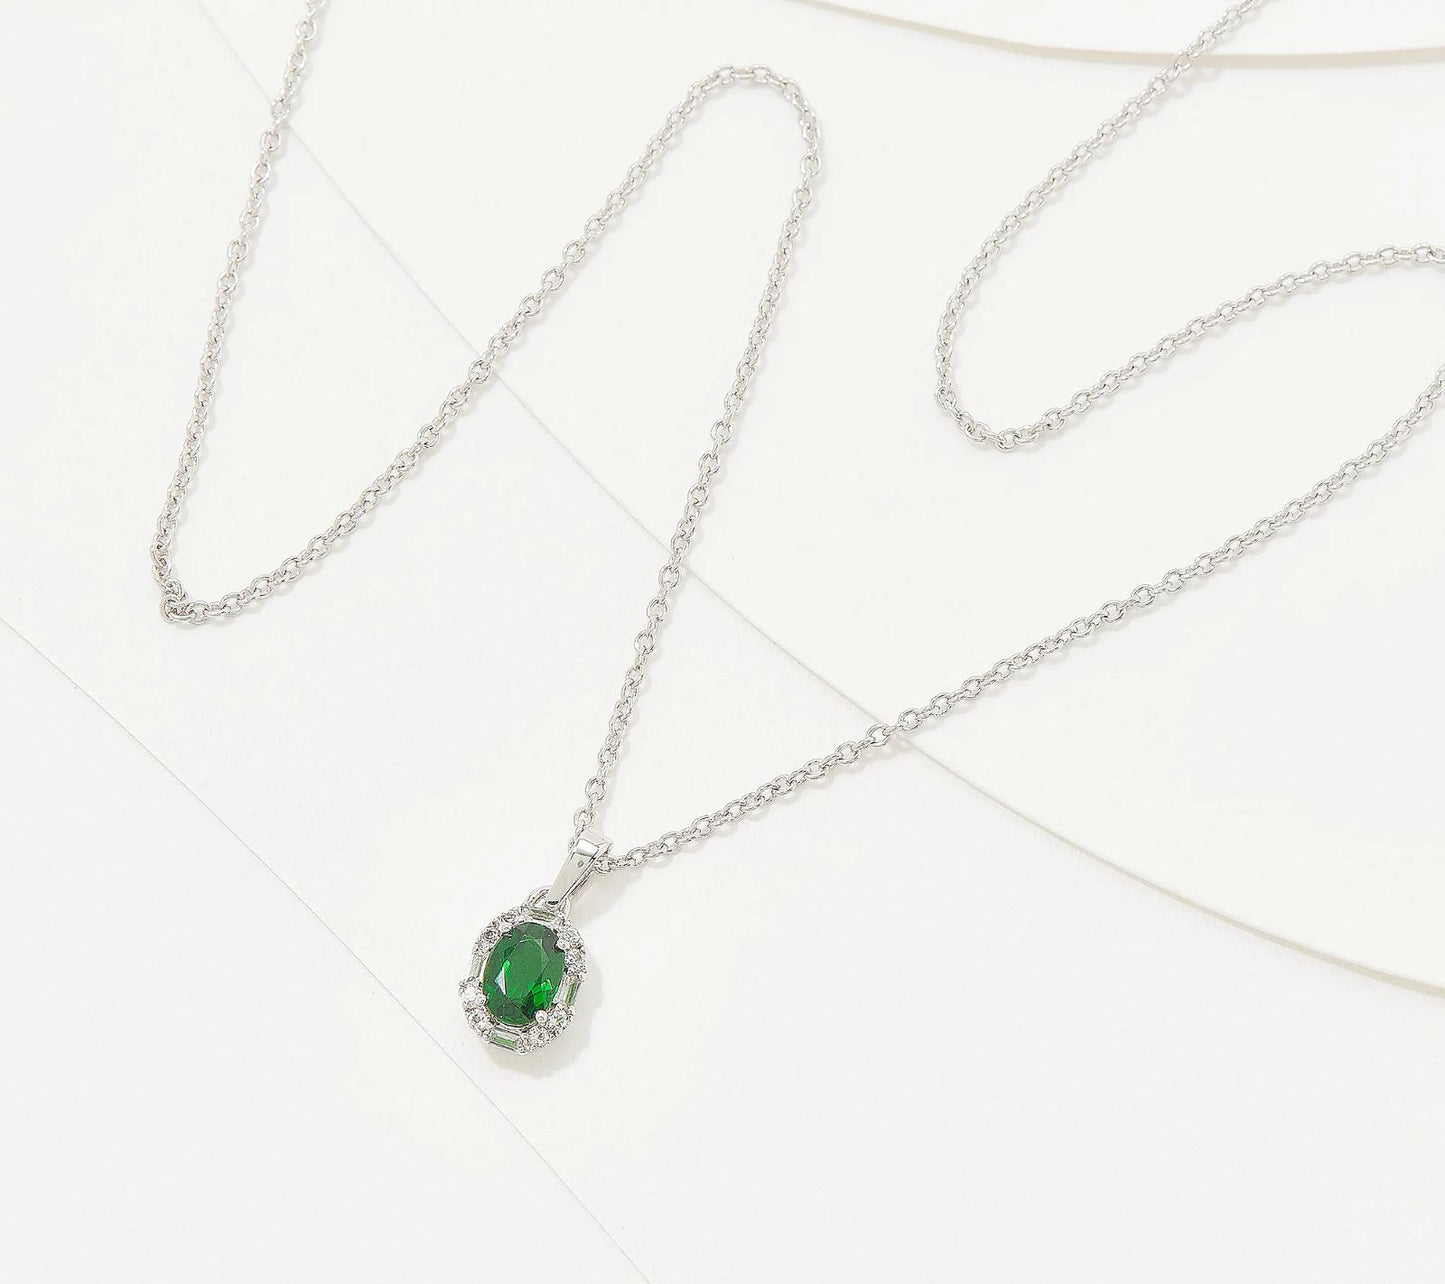 Generation Gems Exotic Oval Chrome Diopside, Sterling Silver, 18"+2" Necklace